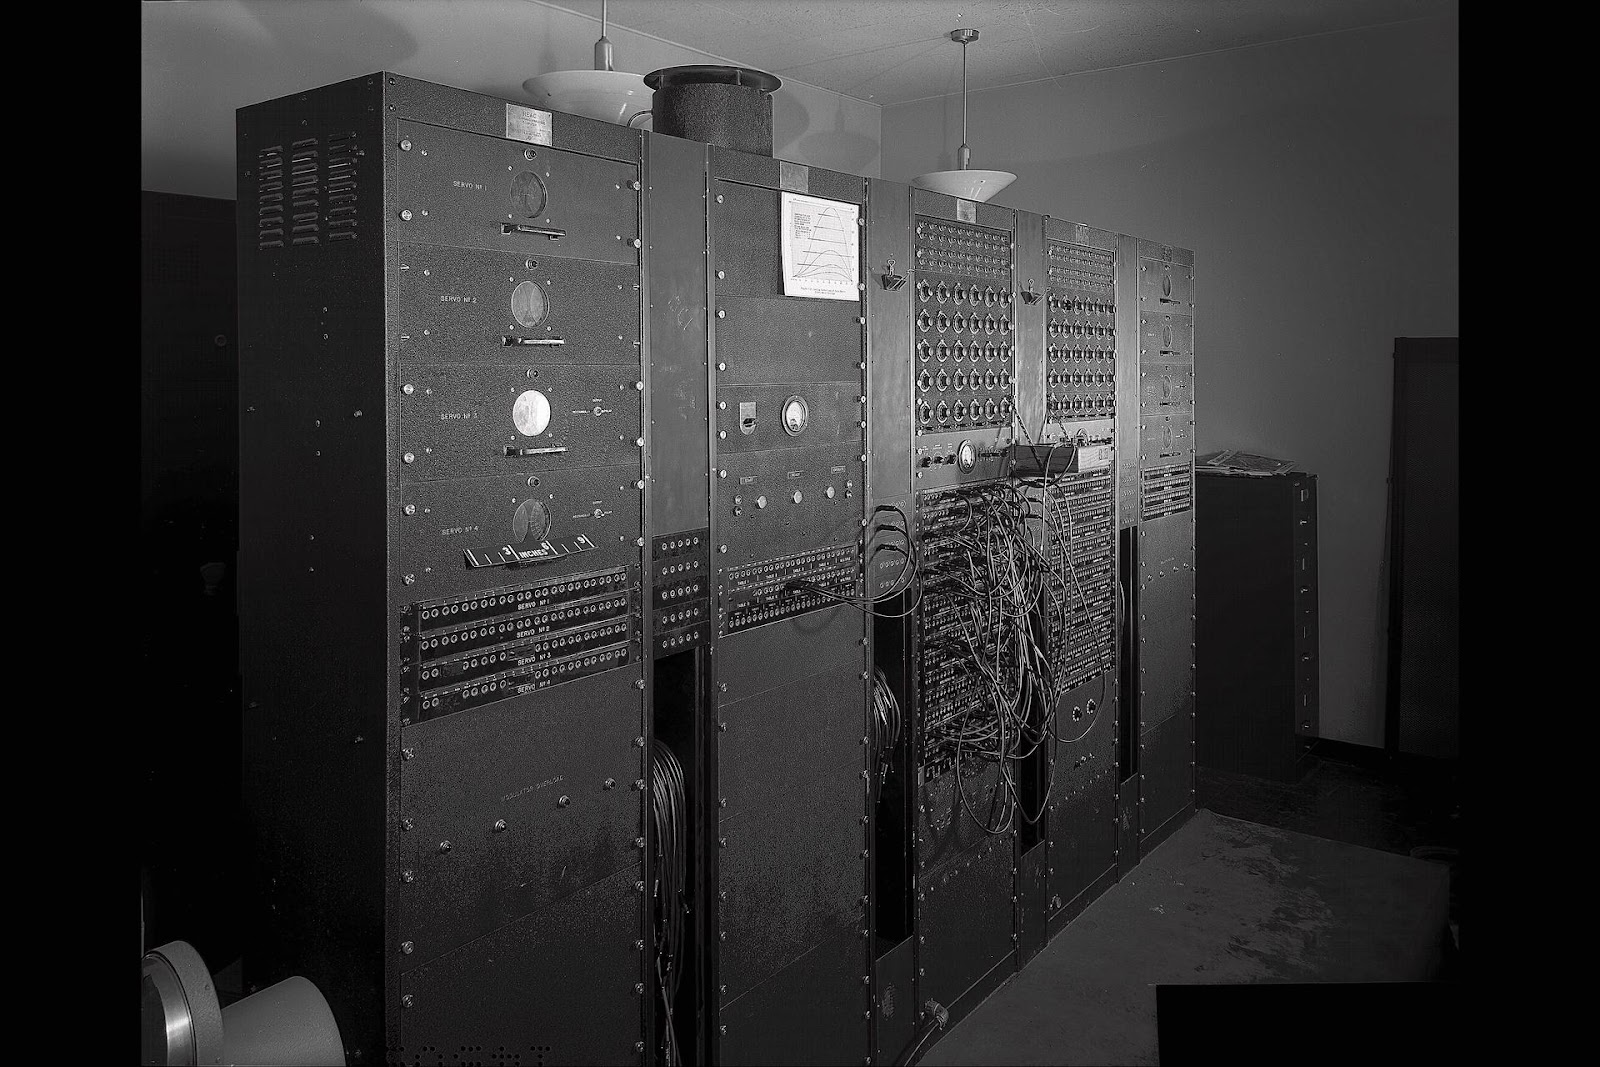 A black and white photo of a large analog computer